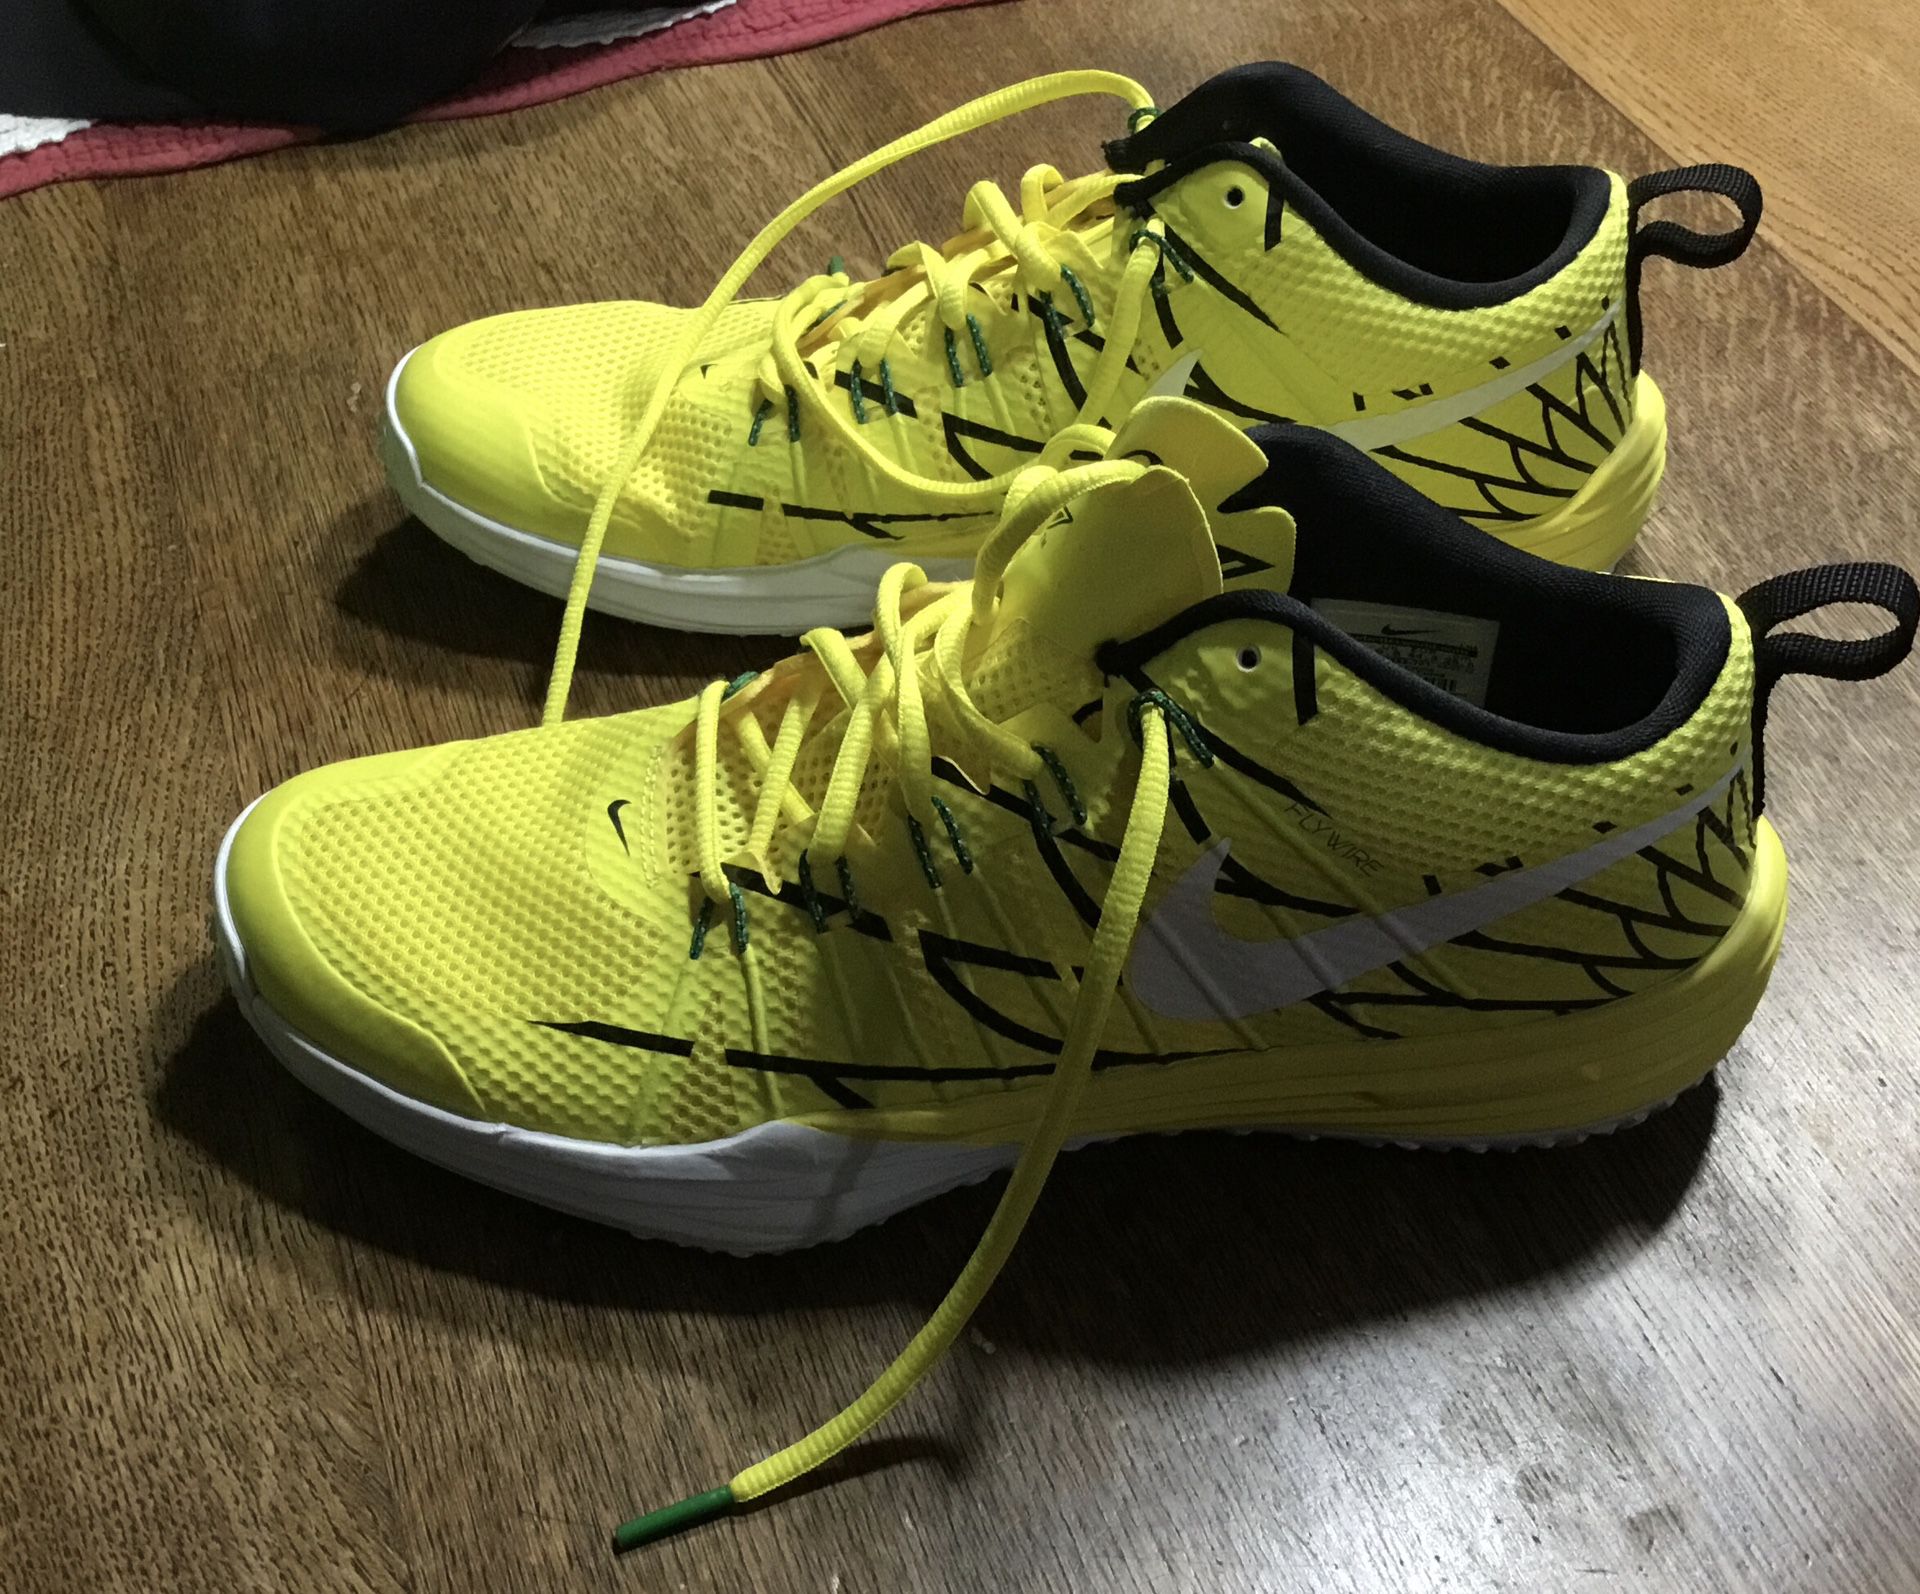 Lyrisch Pool solo NEW! Nike TR1 Oregon “Win The Day” Running Shoes Size 10.5 for Sale in West  Stayton, OR - OfferUp